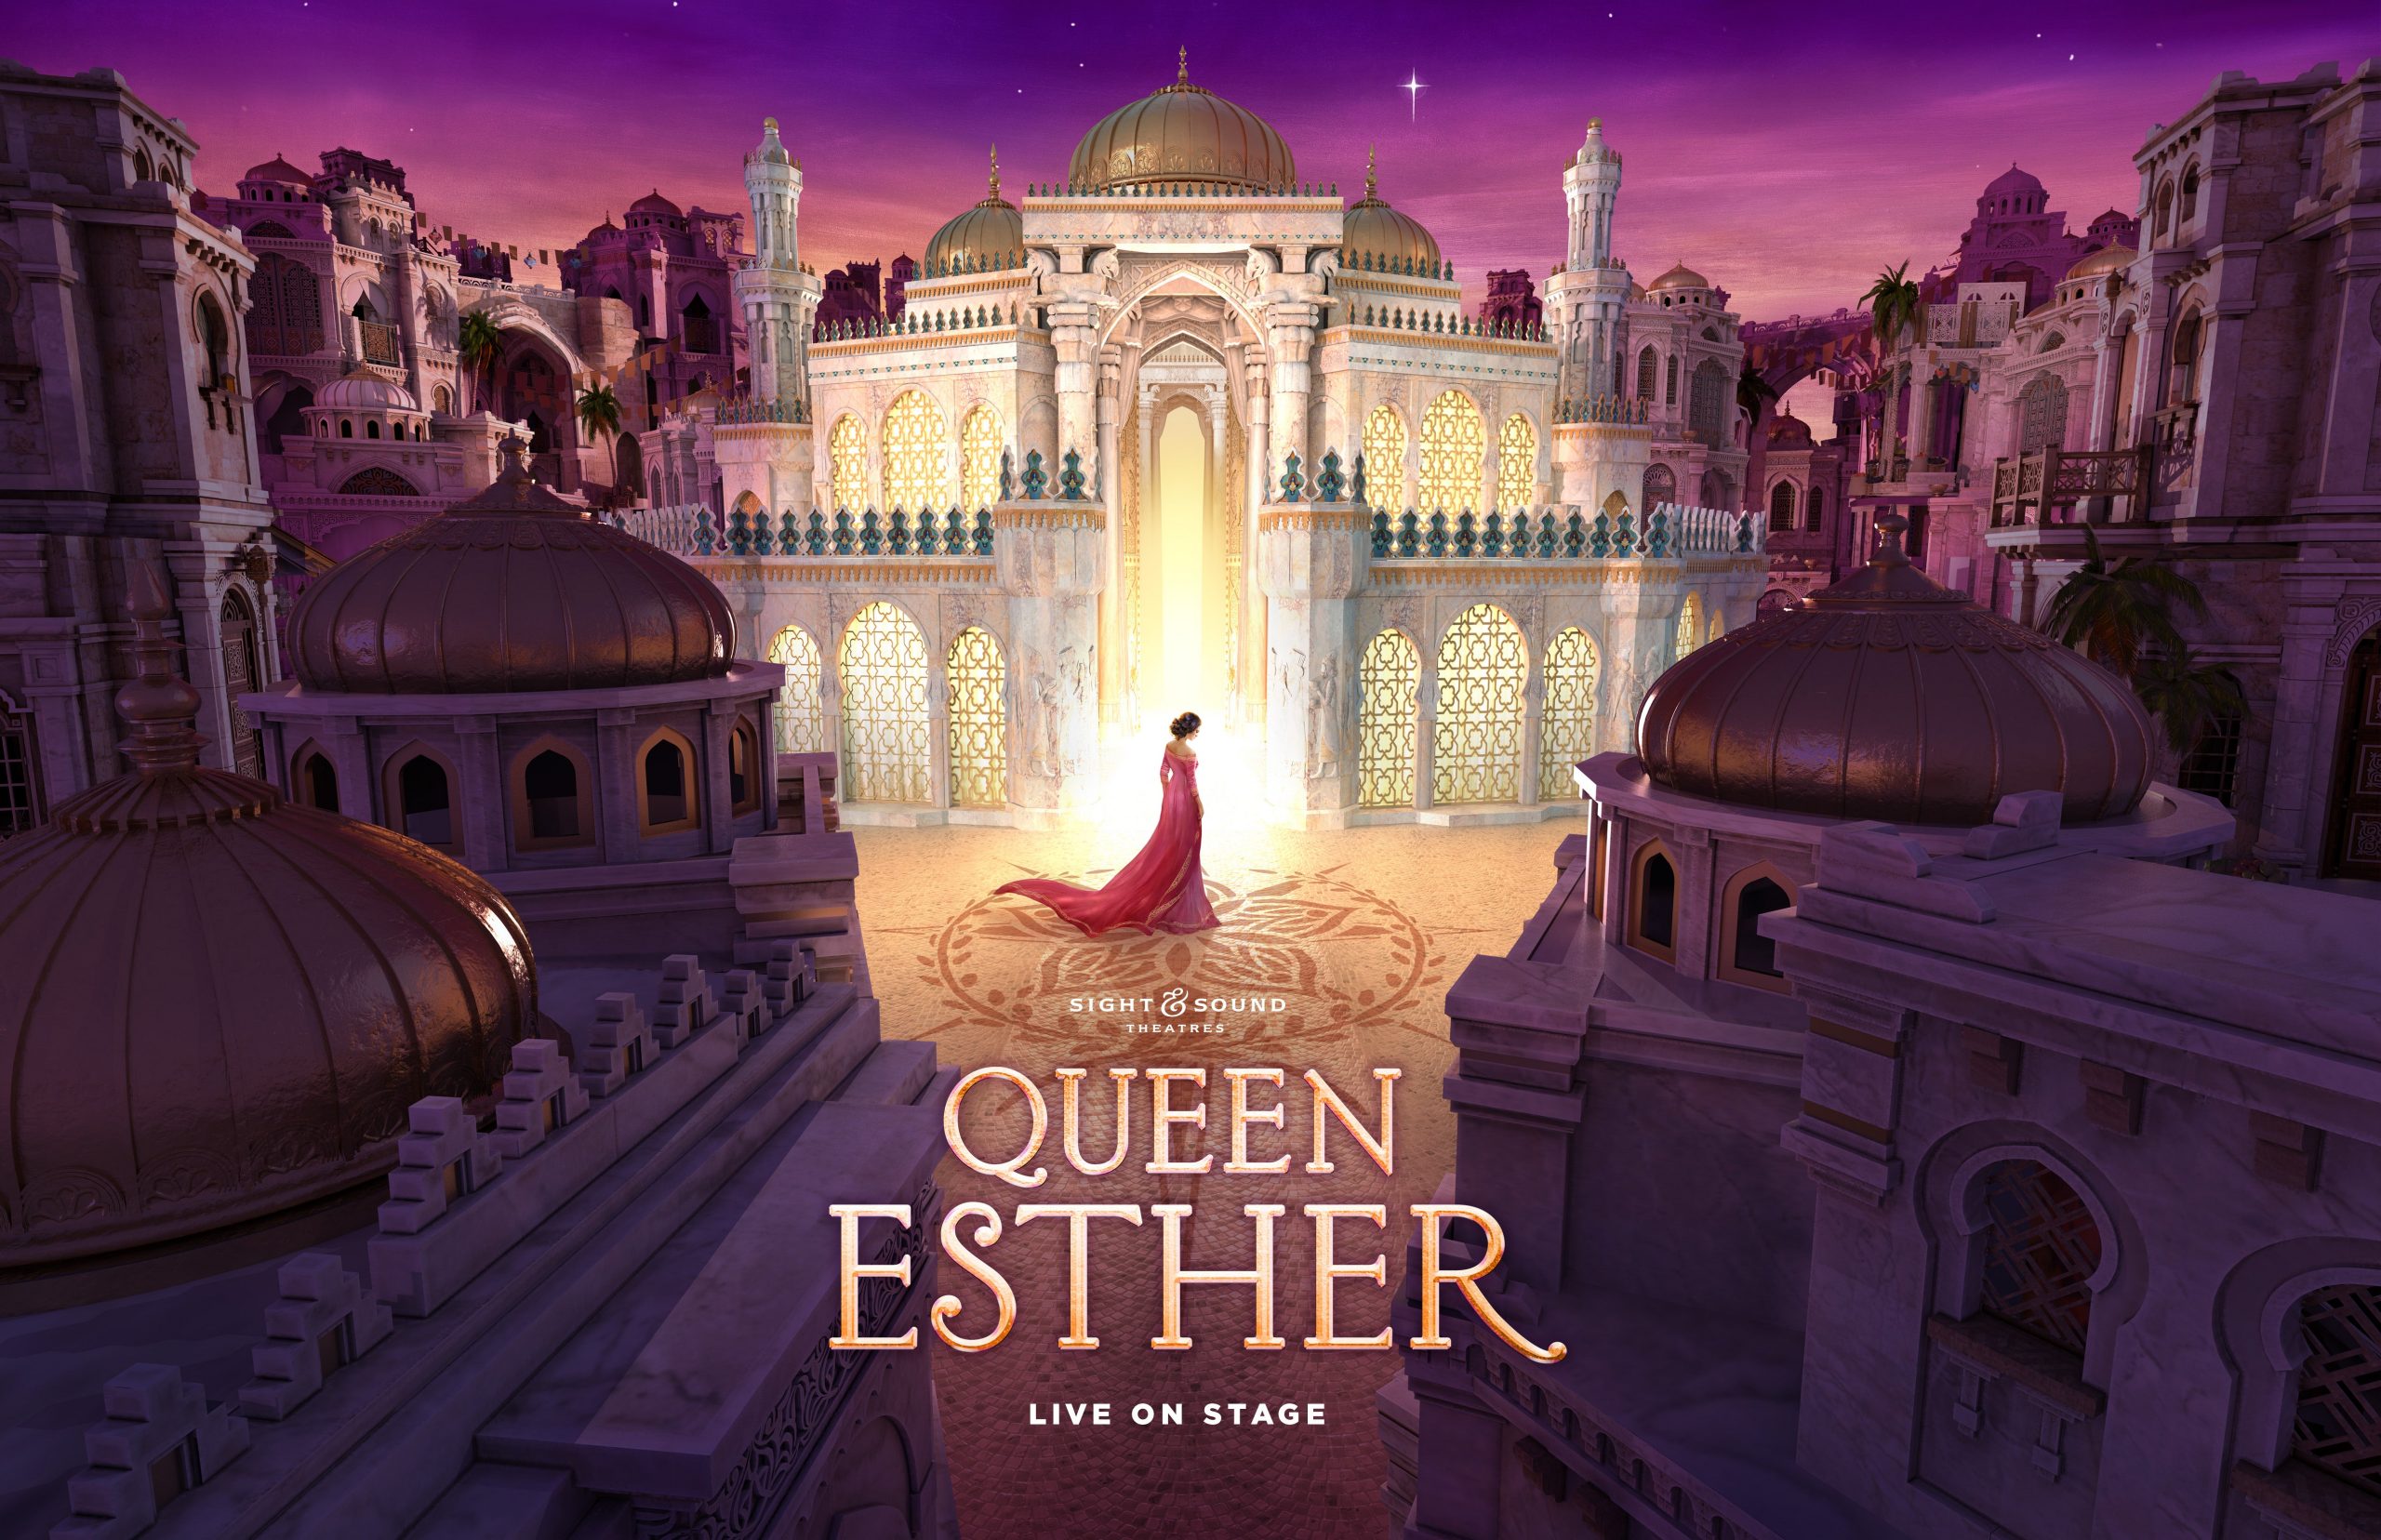 Esther: Queen Esther Show Packages